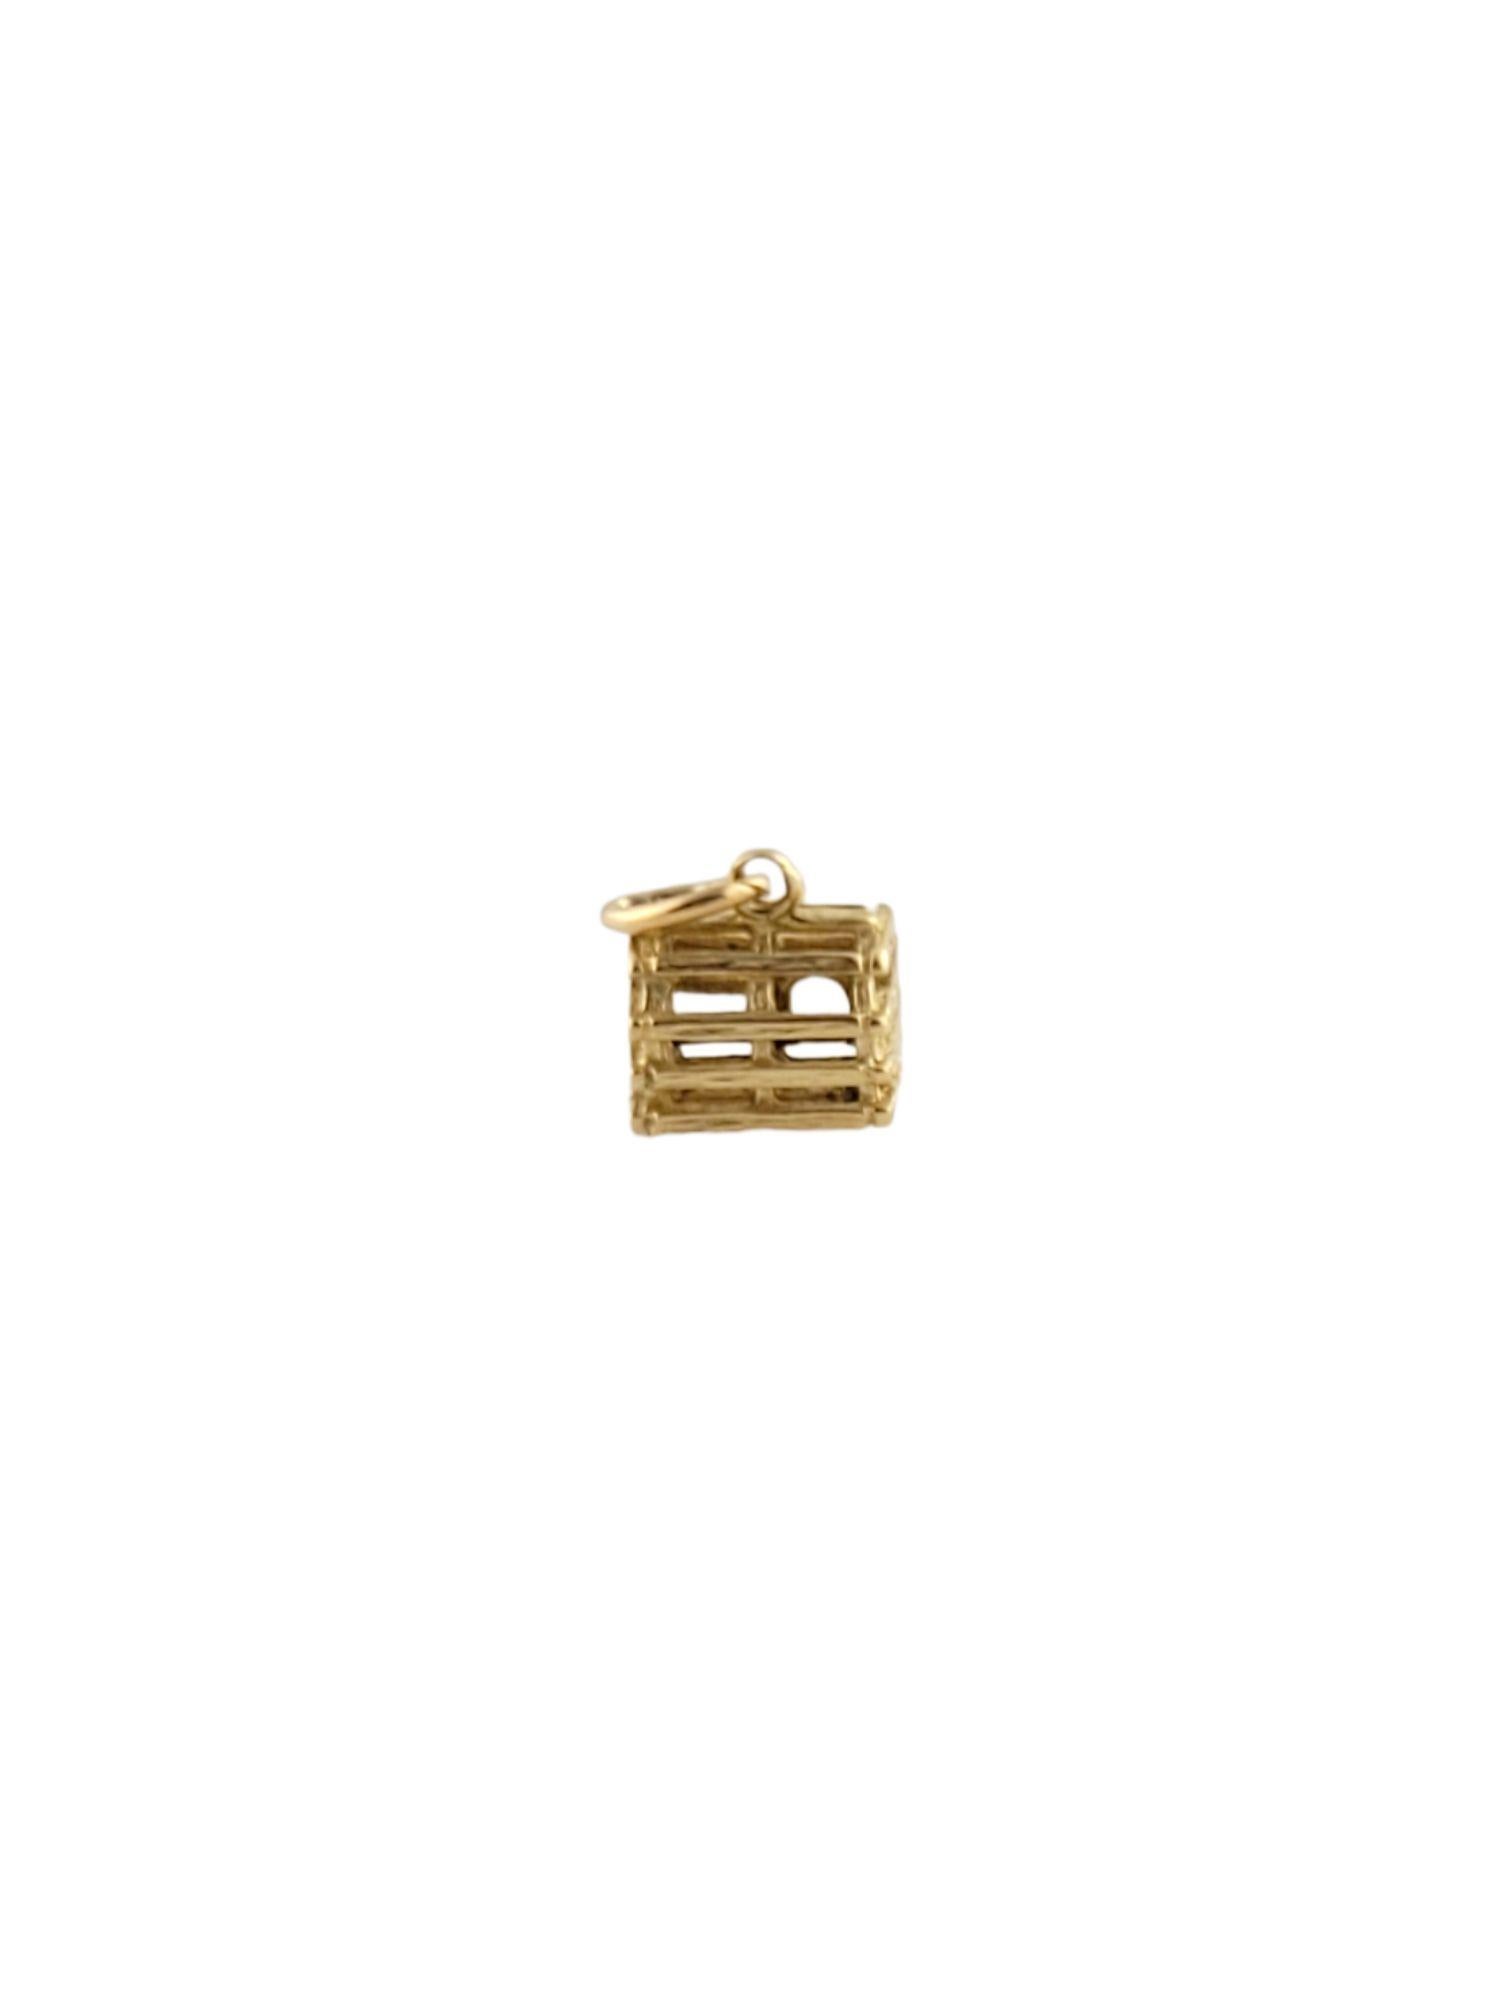 14K Yellow Gold Crab Trap Charm #12953 In Good Condition For Sale In Washington Depot, CT